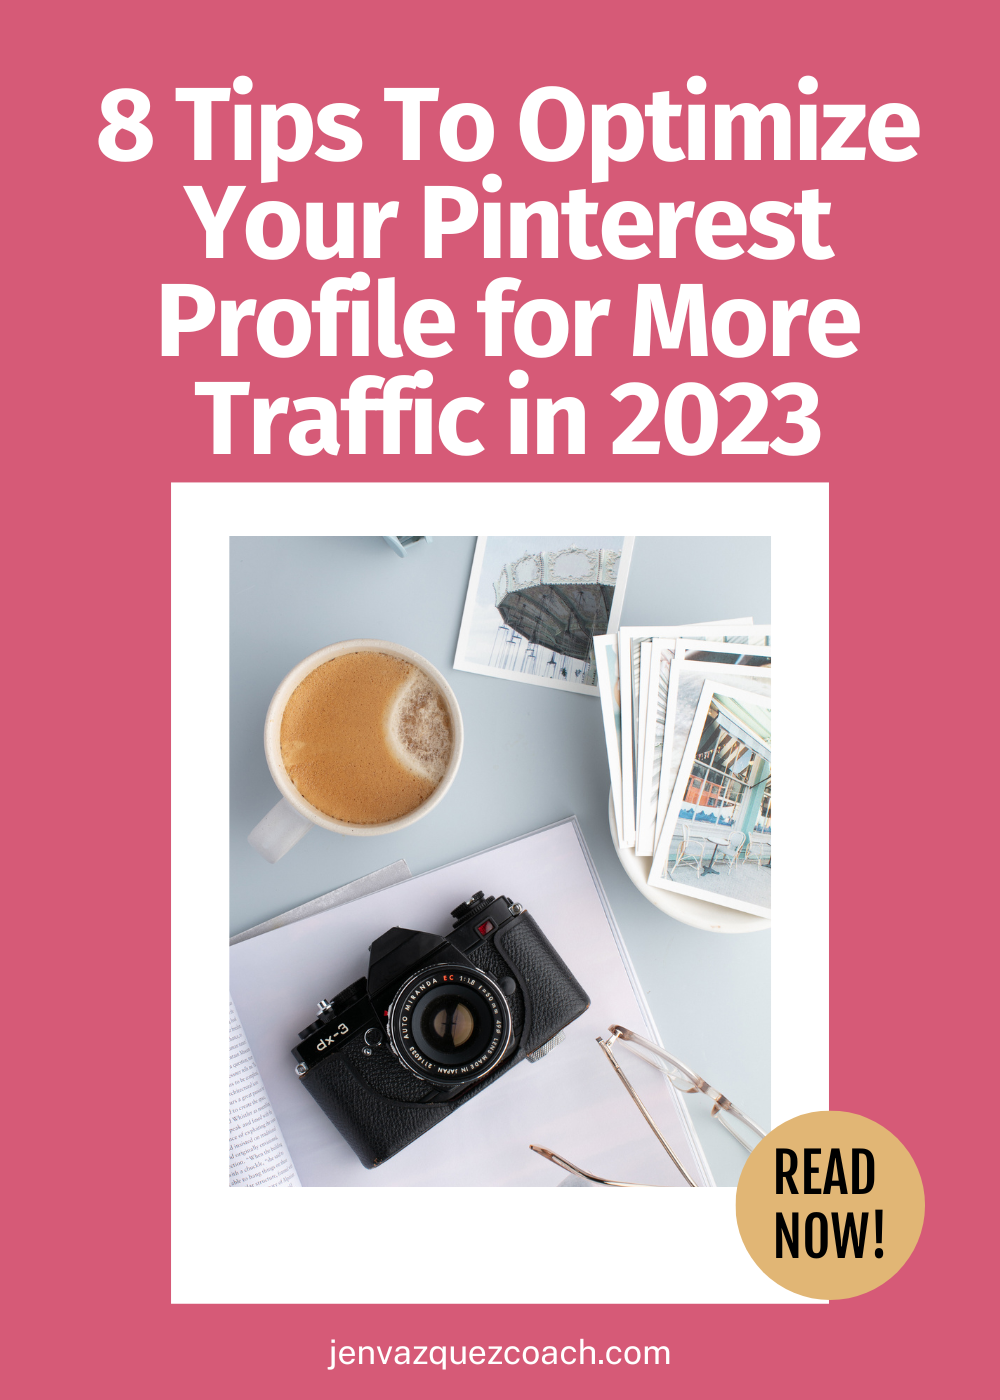 Maximizing Your Pinterest Presence in 2023 A Beginner's Guide to Success on the Platform by Jen Vazquez Media Pinterest Marketing Strategist 